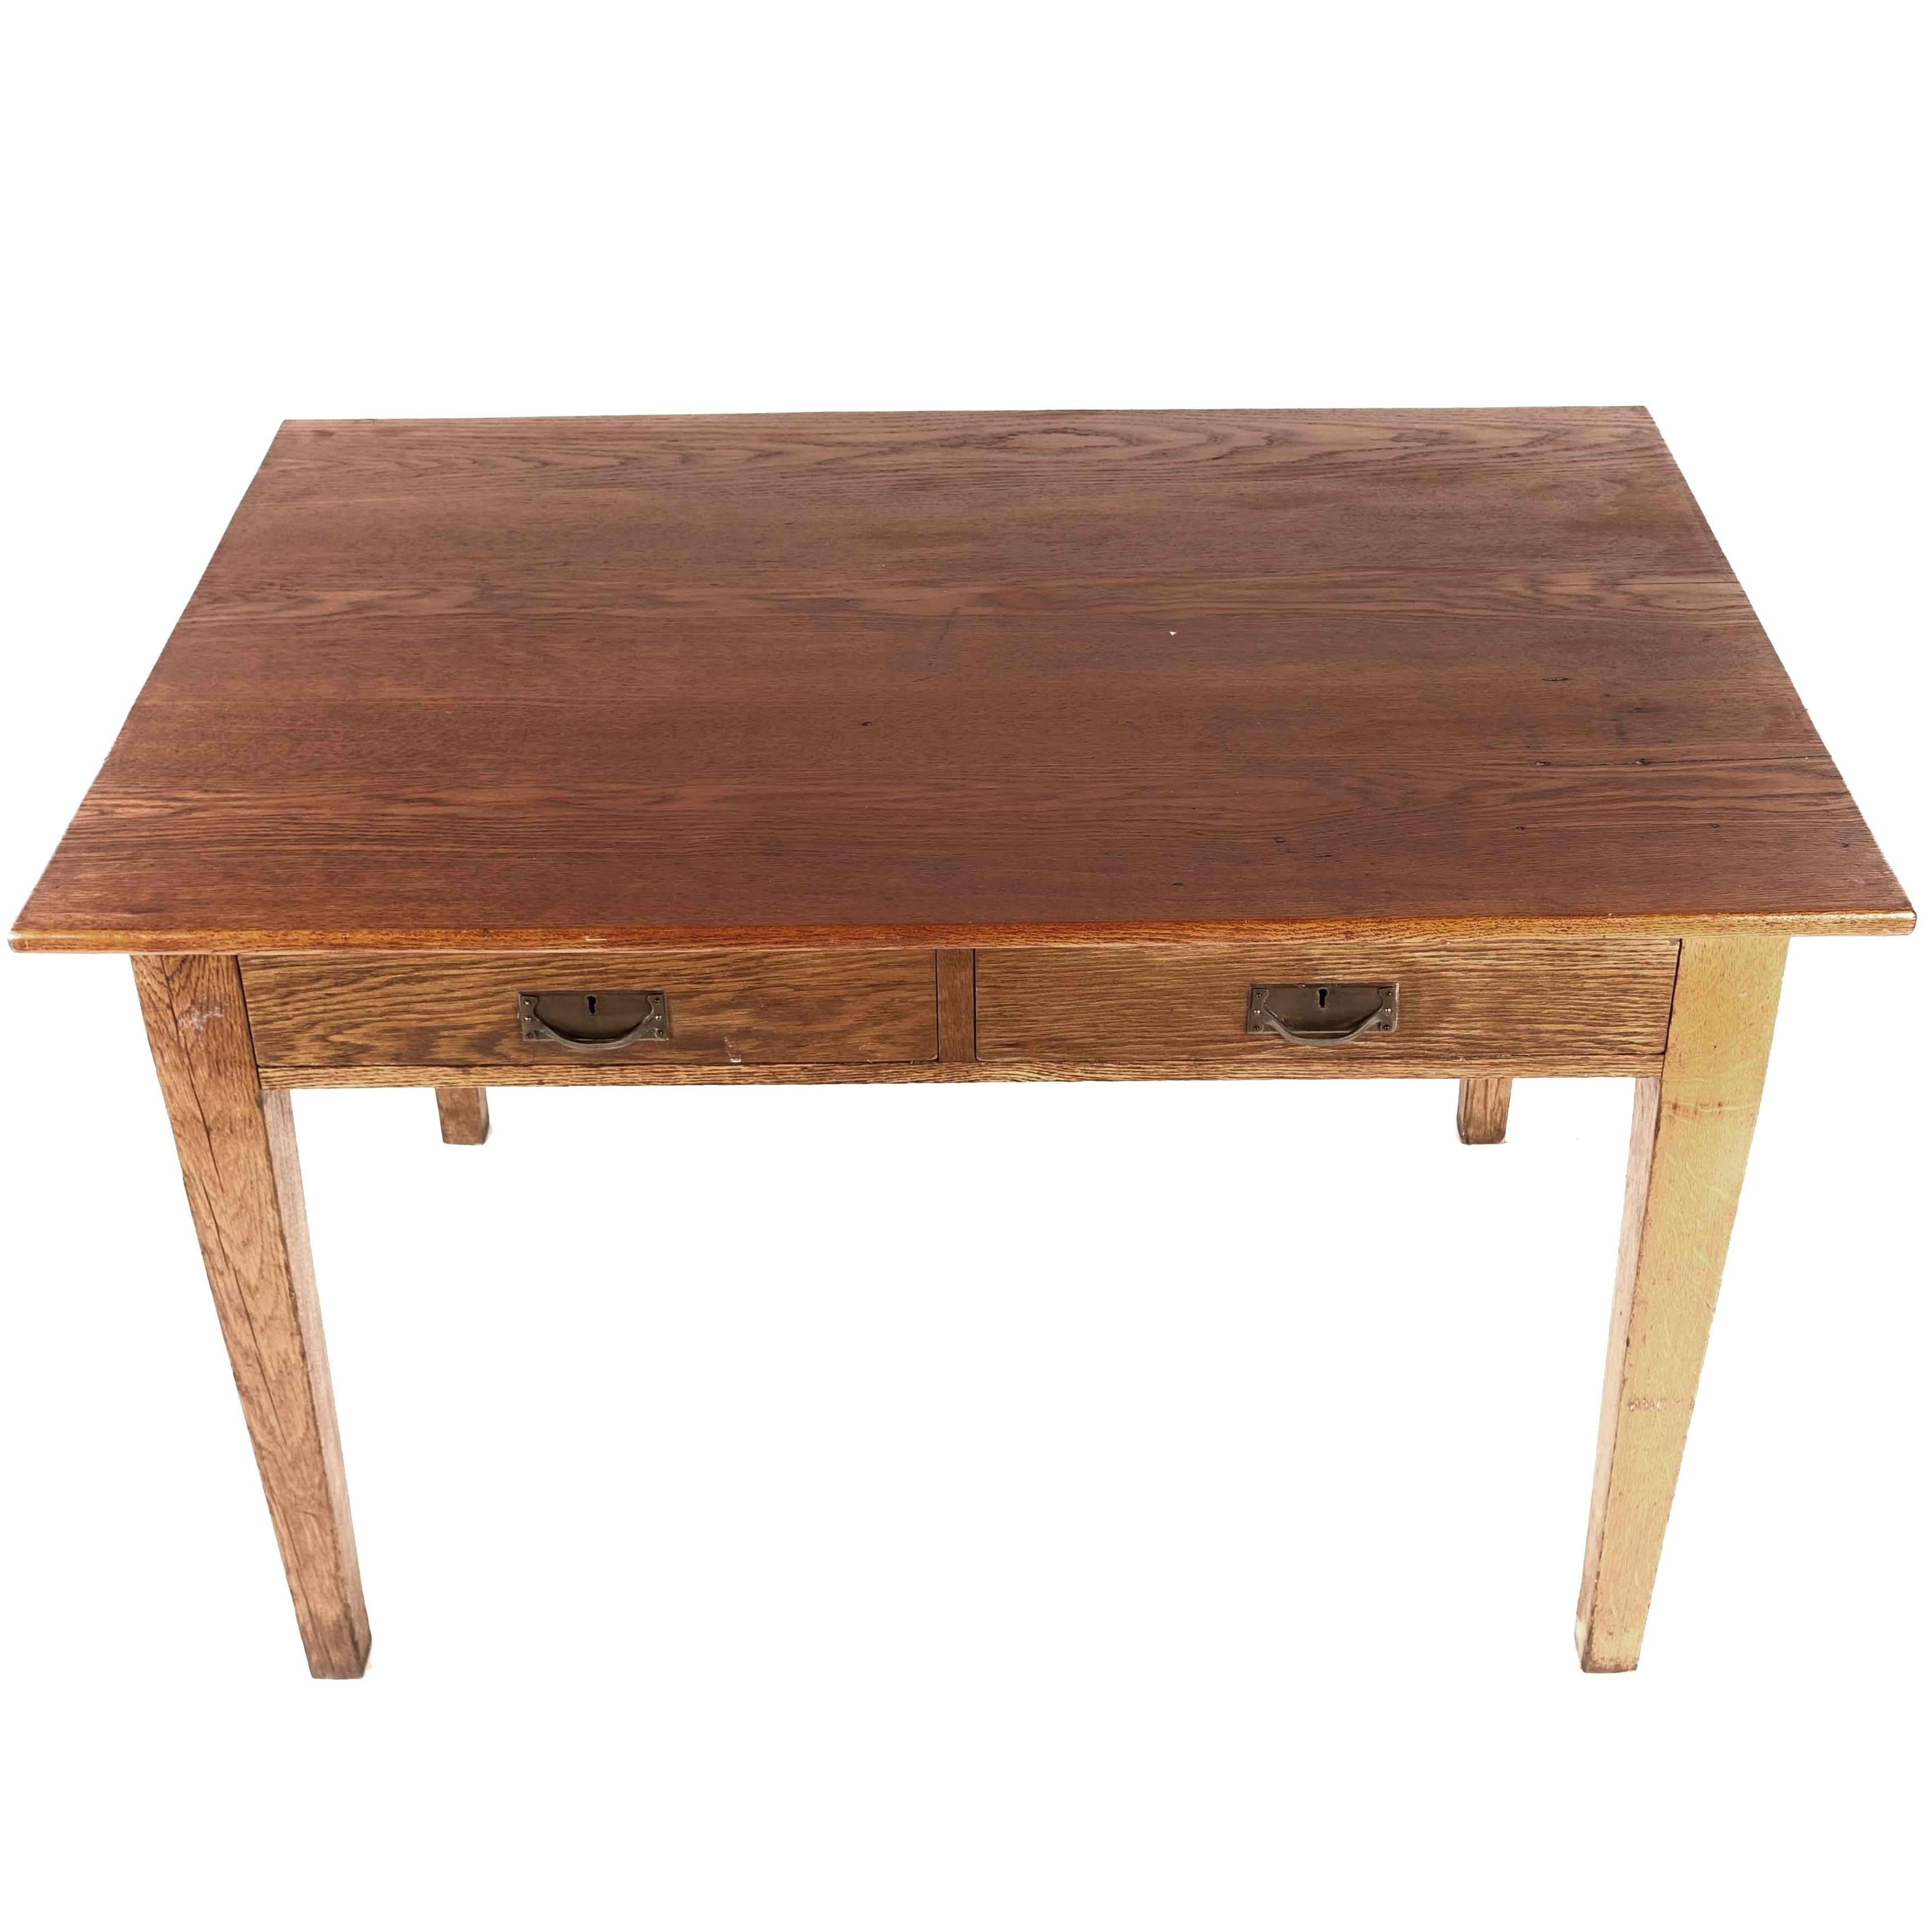 Swedish Antique Oak Kitchen Table with Two Sided Drawers For Sale